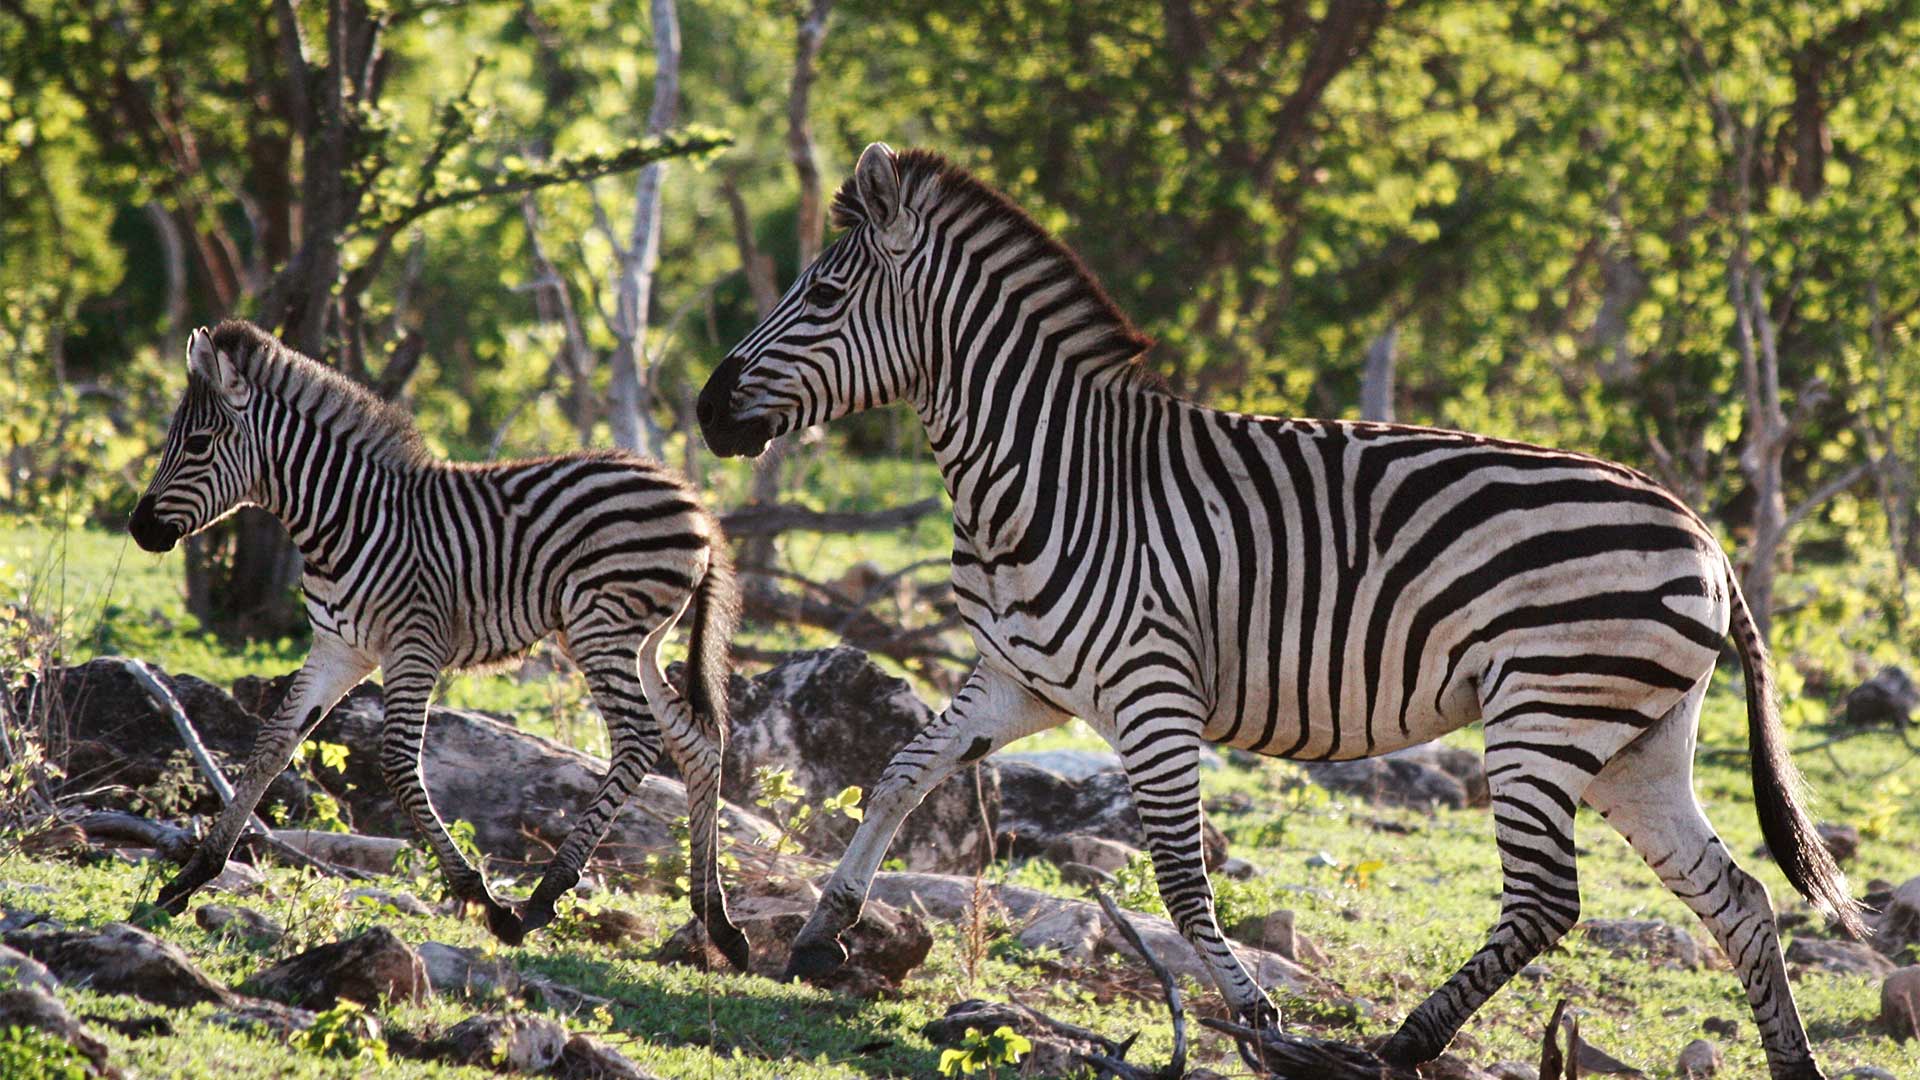 A zebra mare and her foal run through the woods in Chobe National Park, Botswana